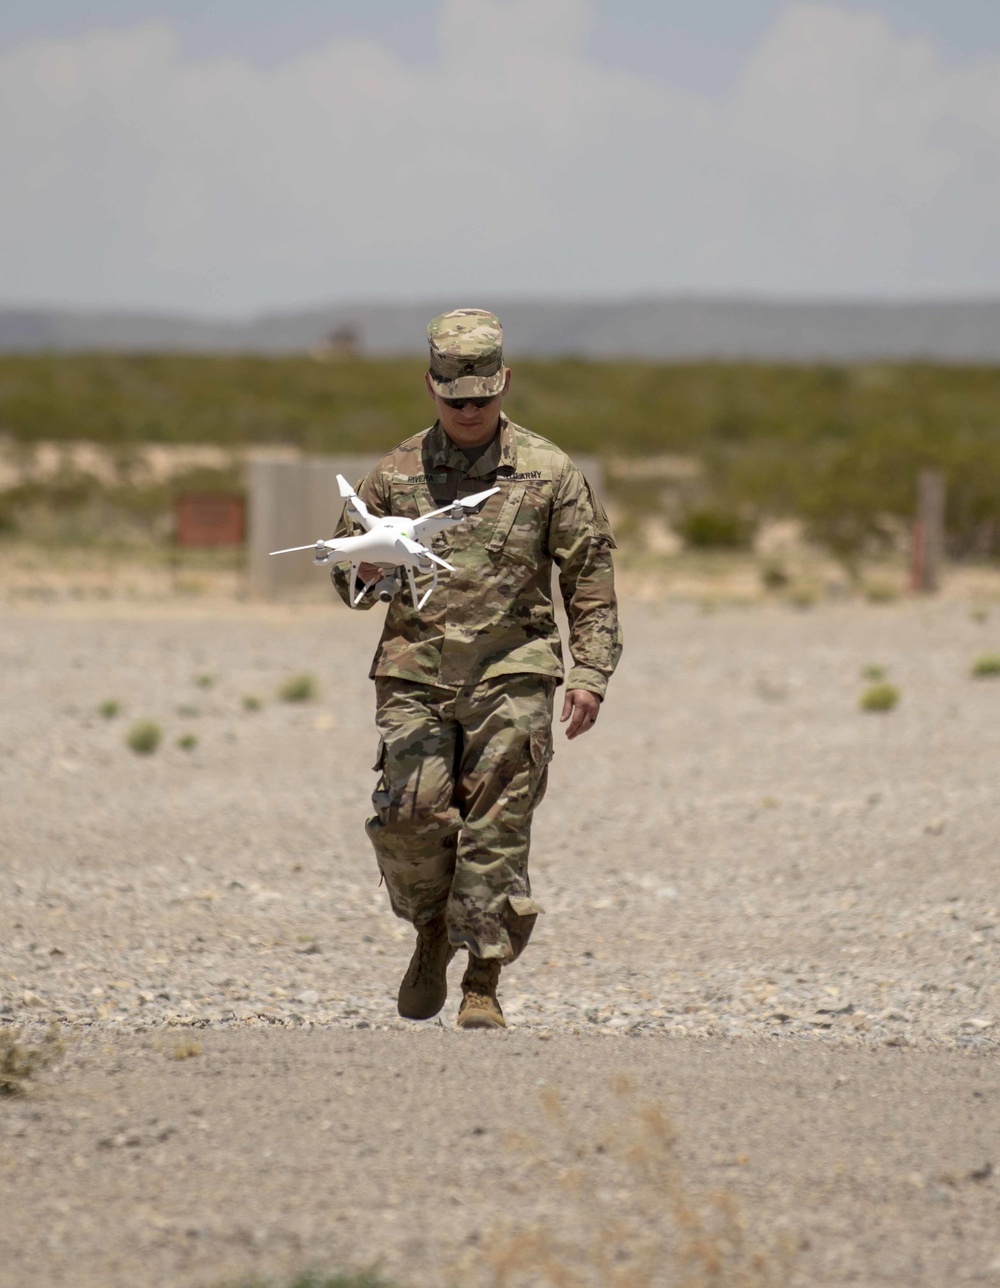 5th Armored Brigade First in the Army to Offer Counter UAS, Best Practices